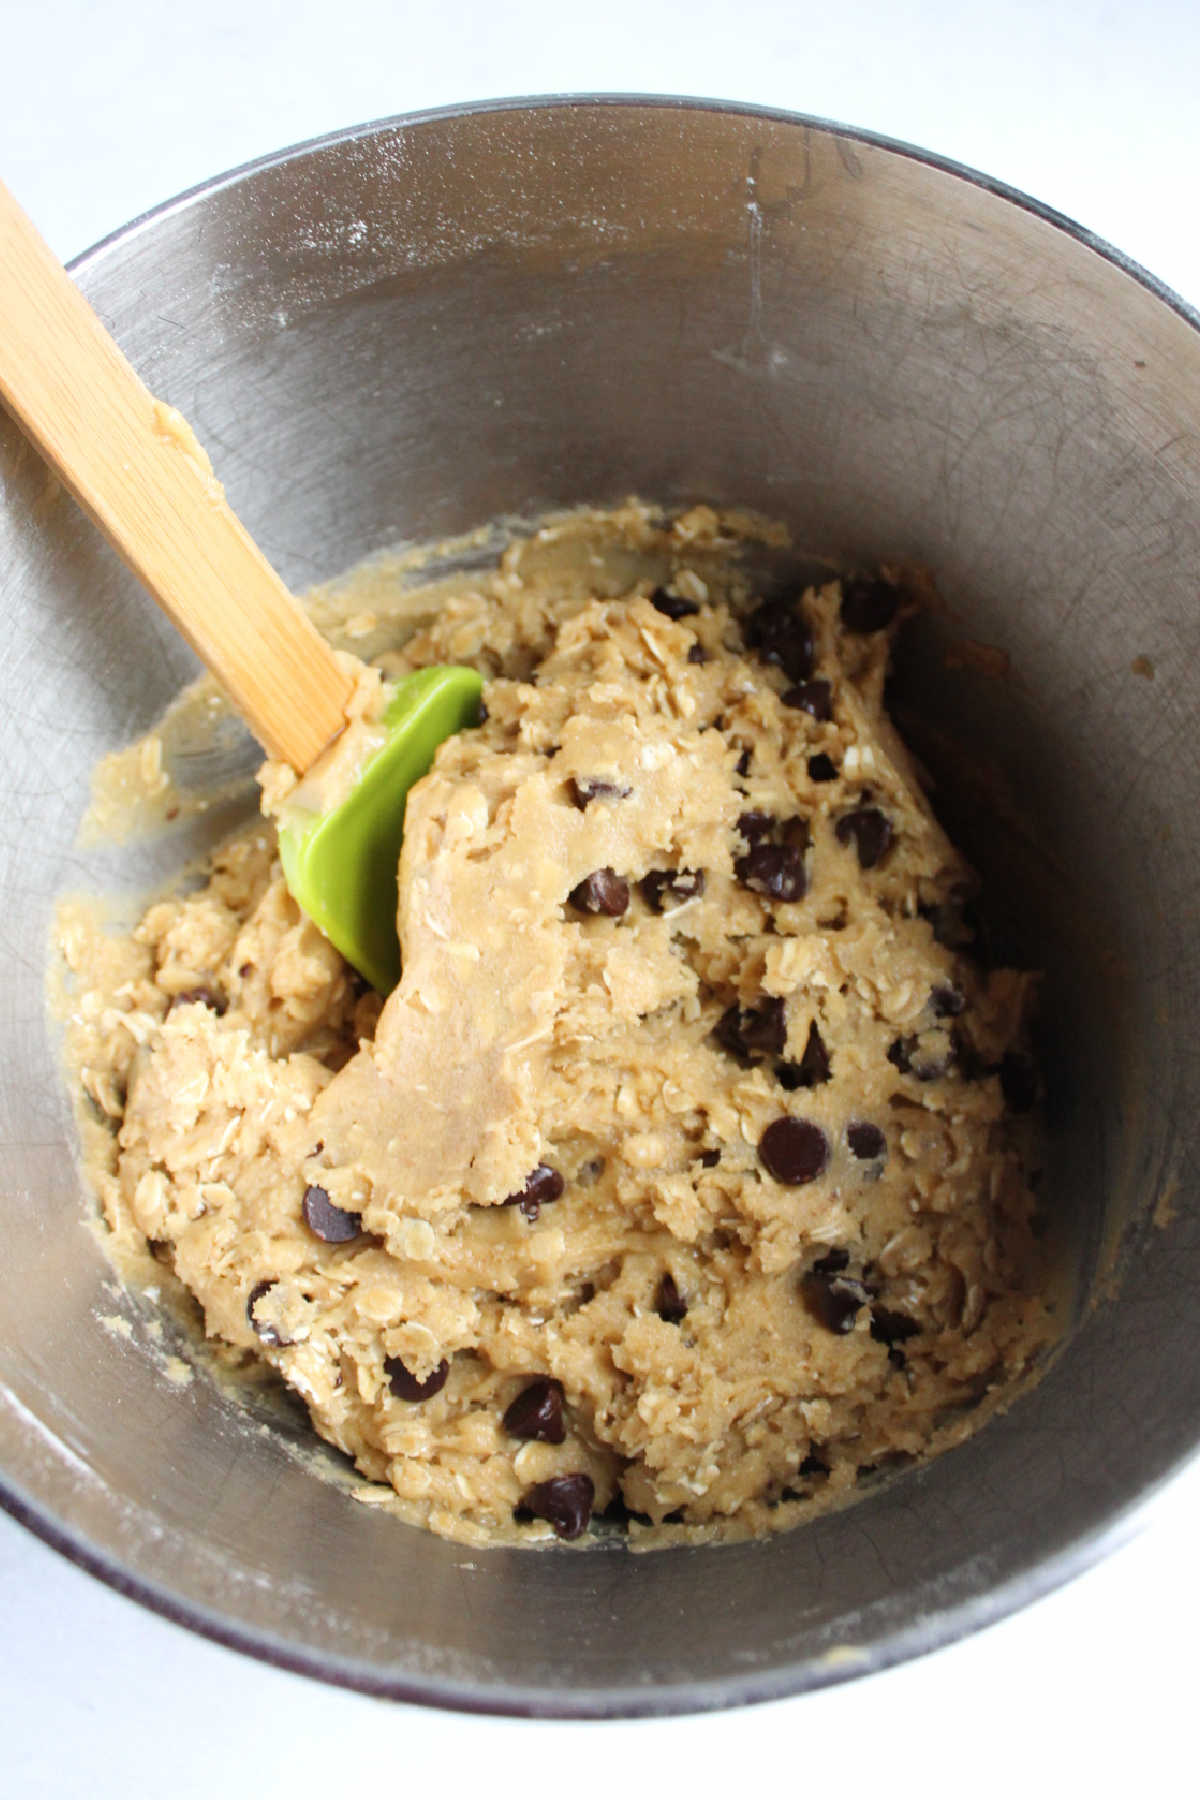 Mixer bowl filled with cowgirl cookie dough with oats and chocolate chips.